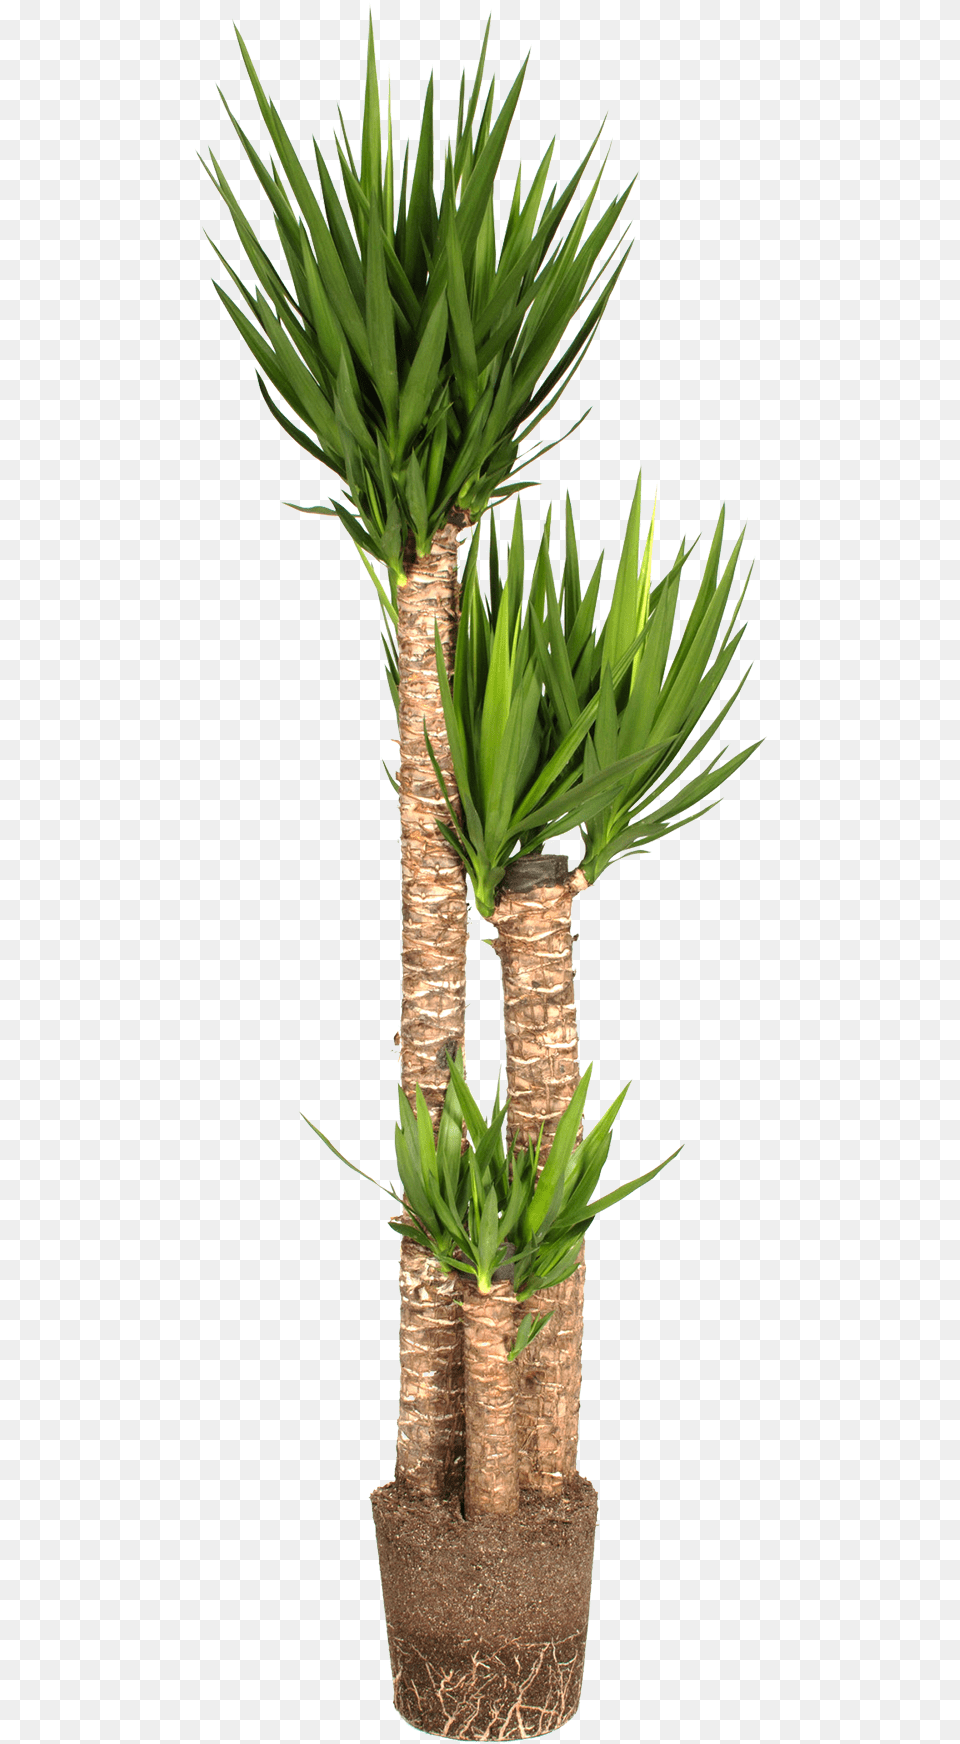 Flowerpot, Plant, Tree, Potted Plant, Palm Tree Png Image